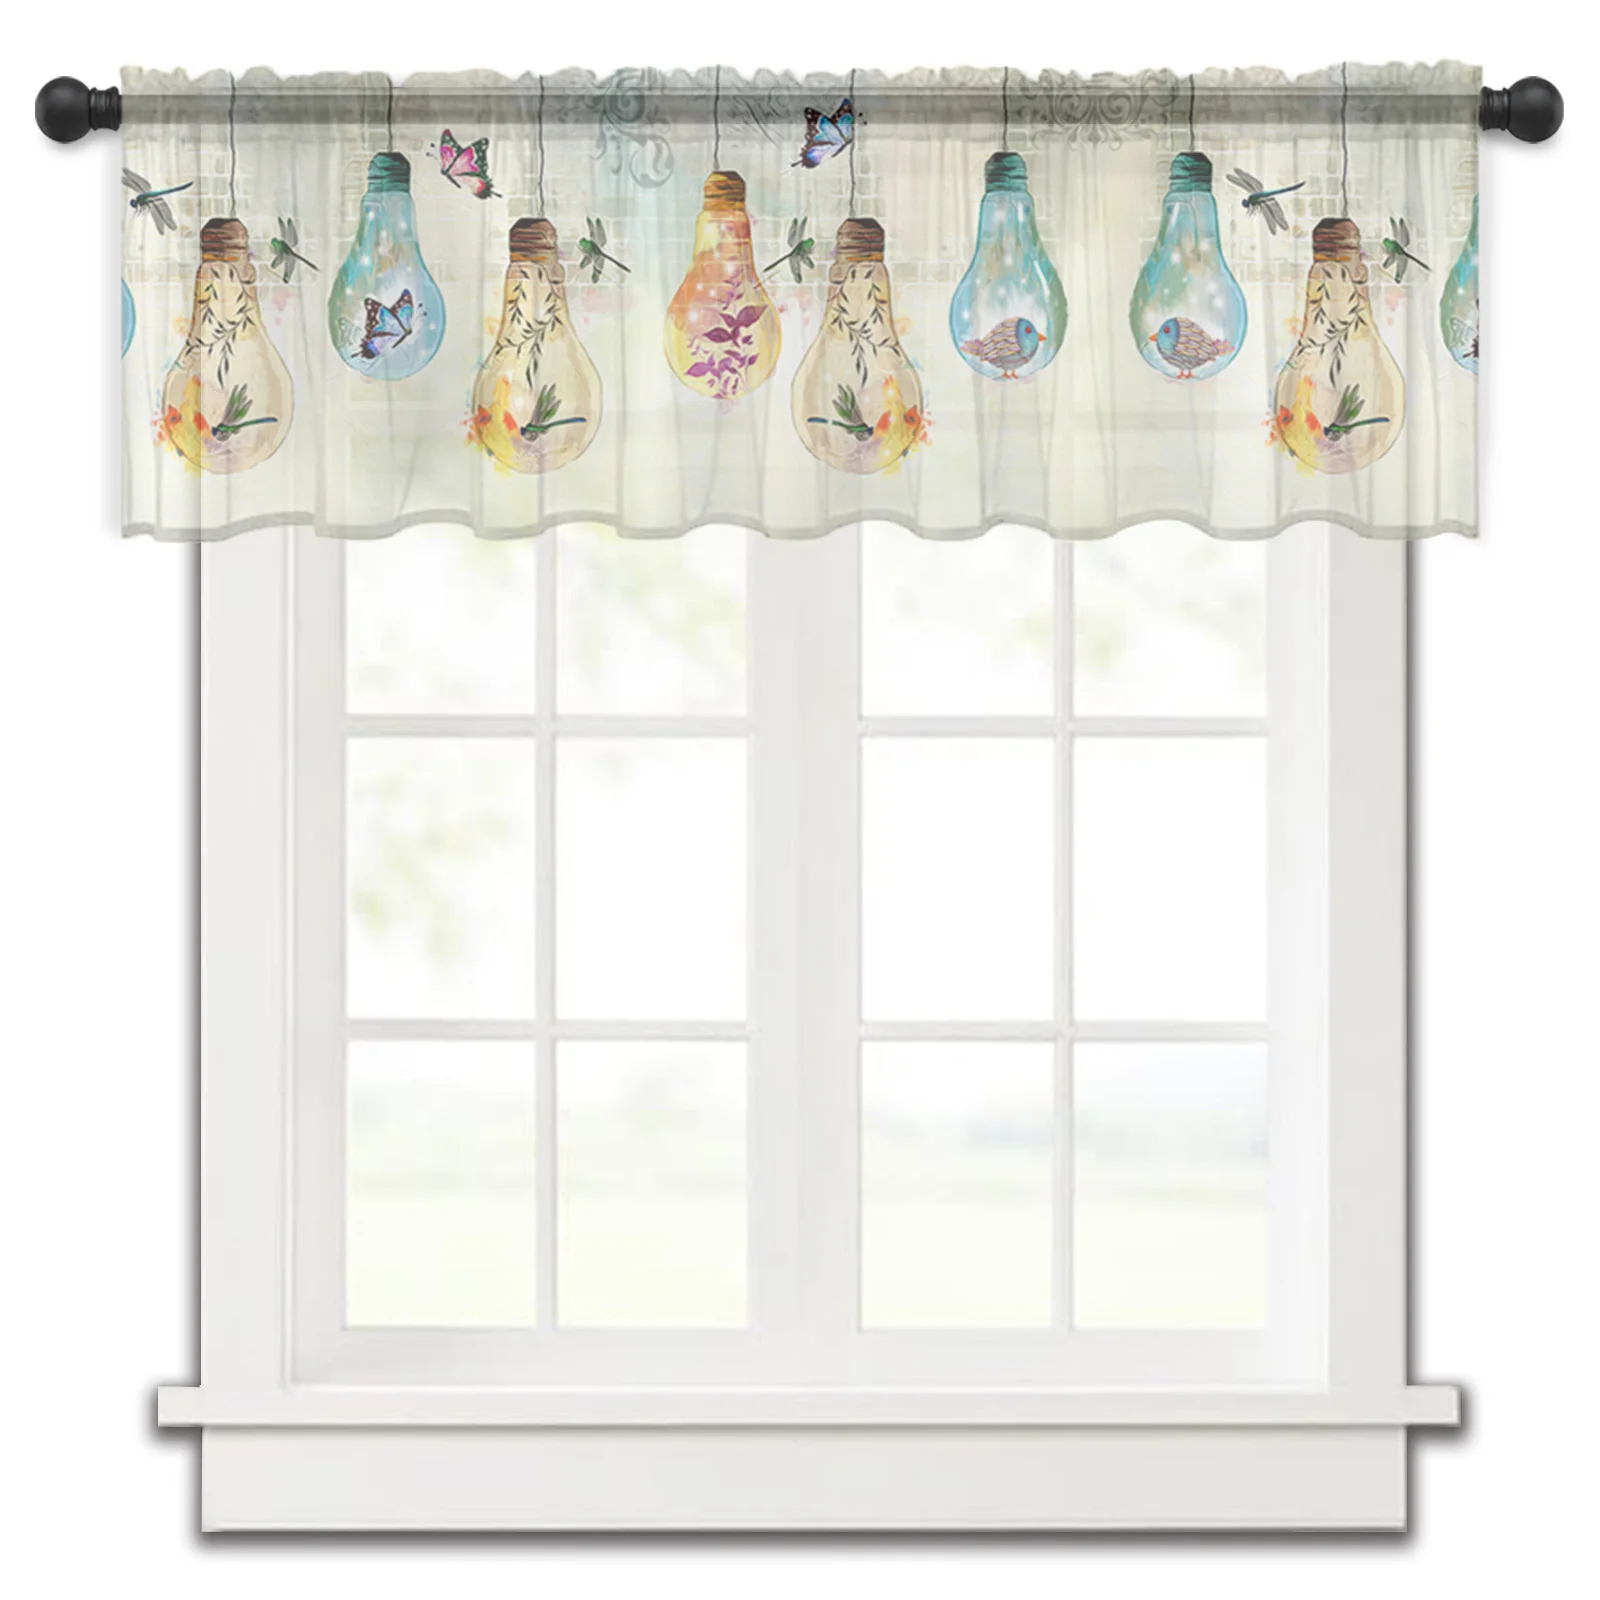 

Bulbs Butterflies Flowers Birds Kitchen Small Curtain Tulle Sheer Short Curtain Bedroom Living Room Home Decor Voile Drapes